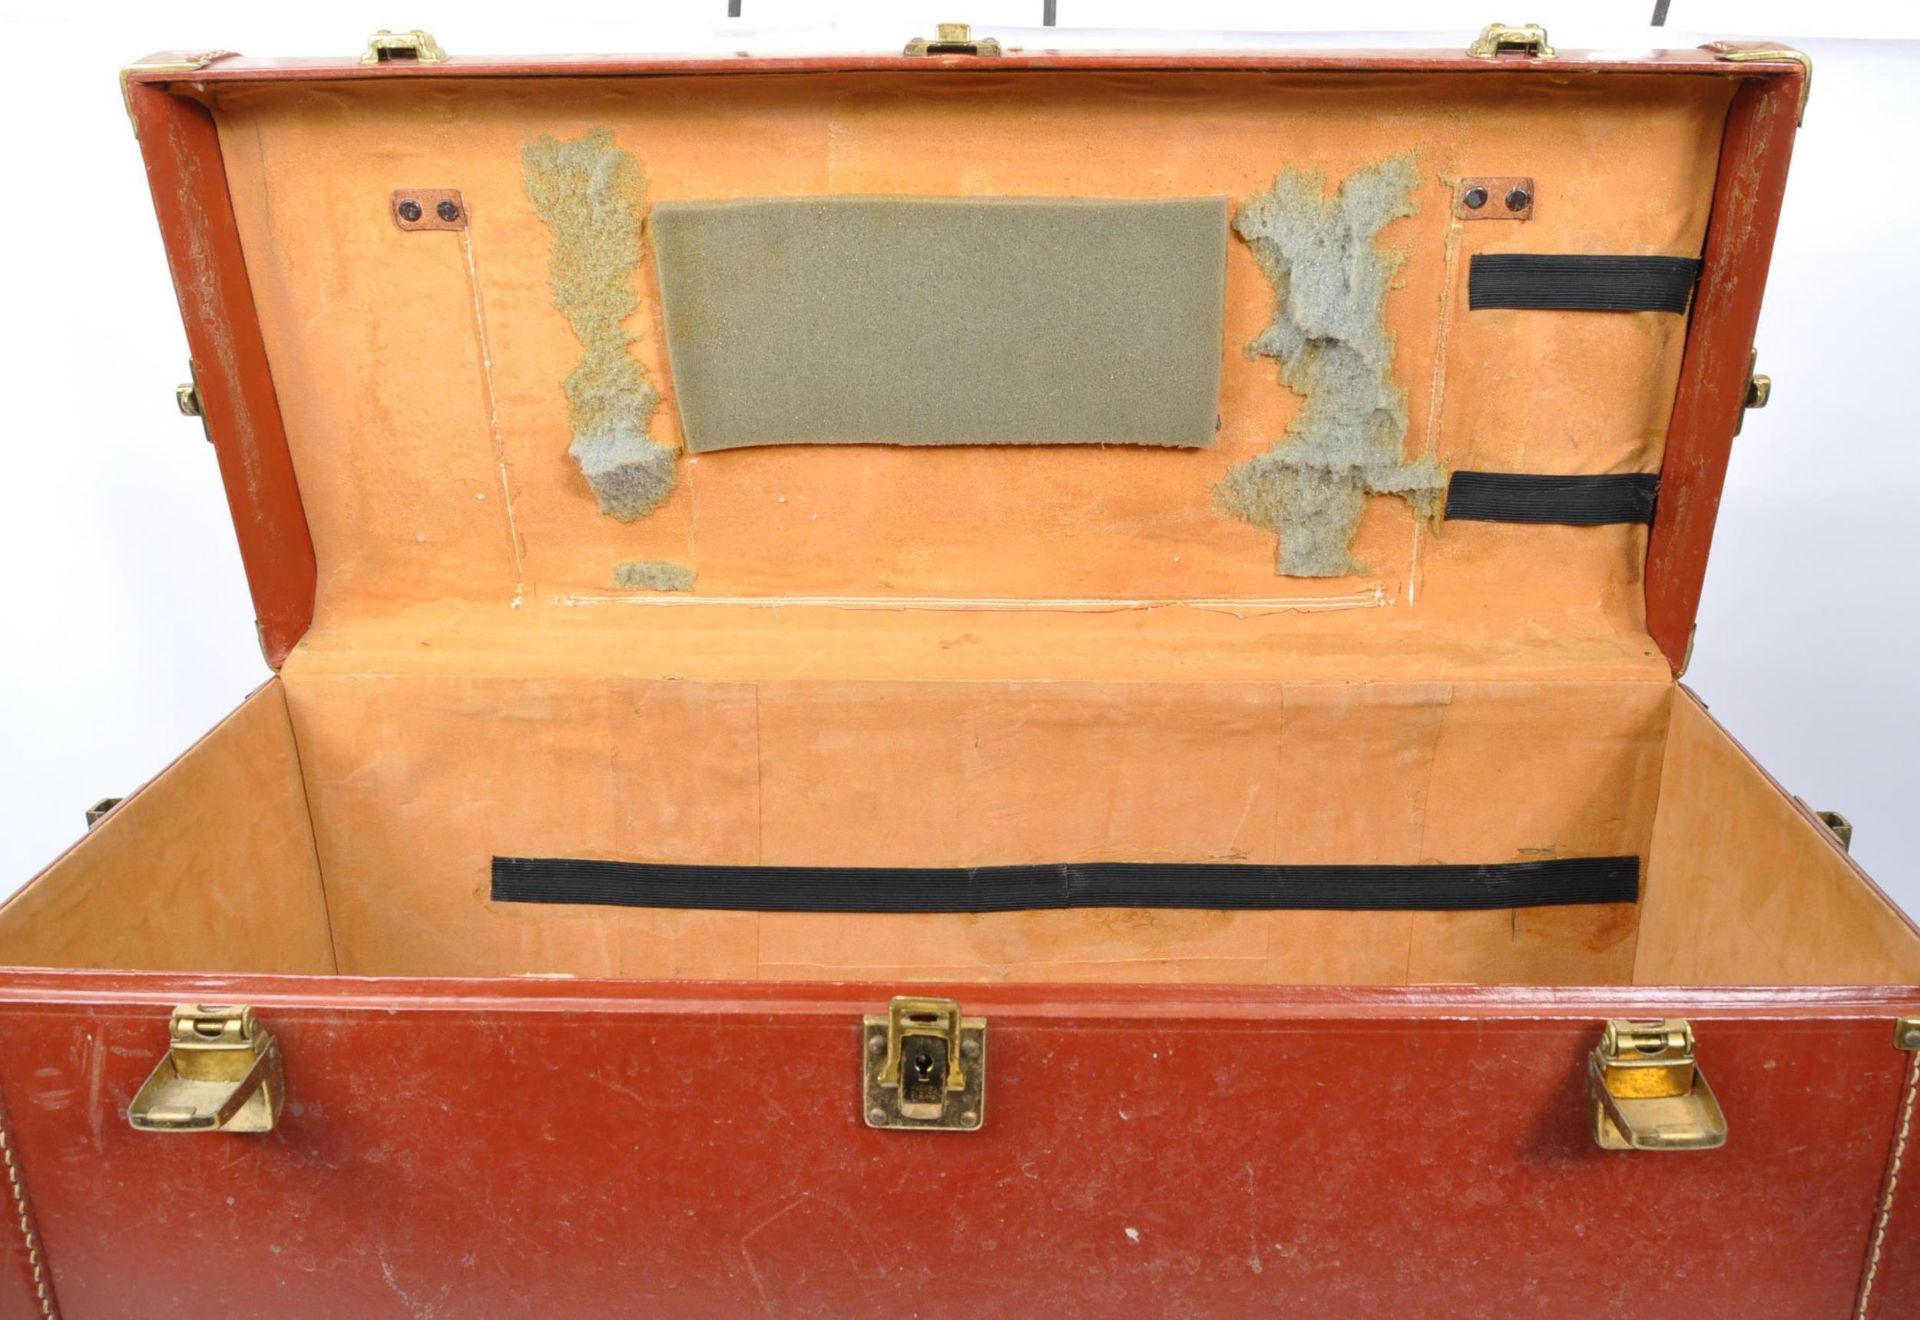 RED LEATHER TRAVEL SUITCASE TRUNK - EARLY 20TH CENTURY - Image 3 of 6